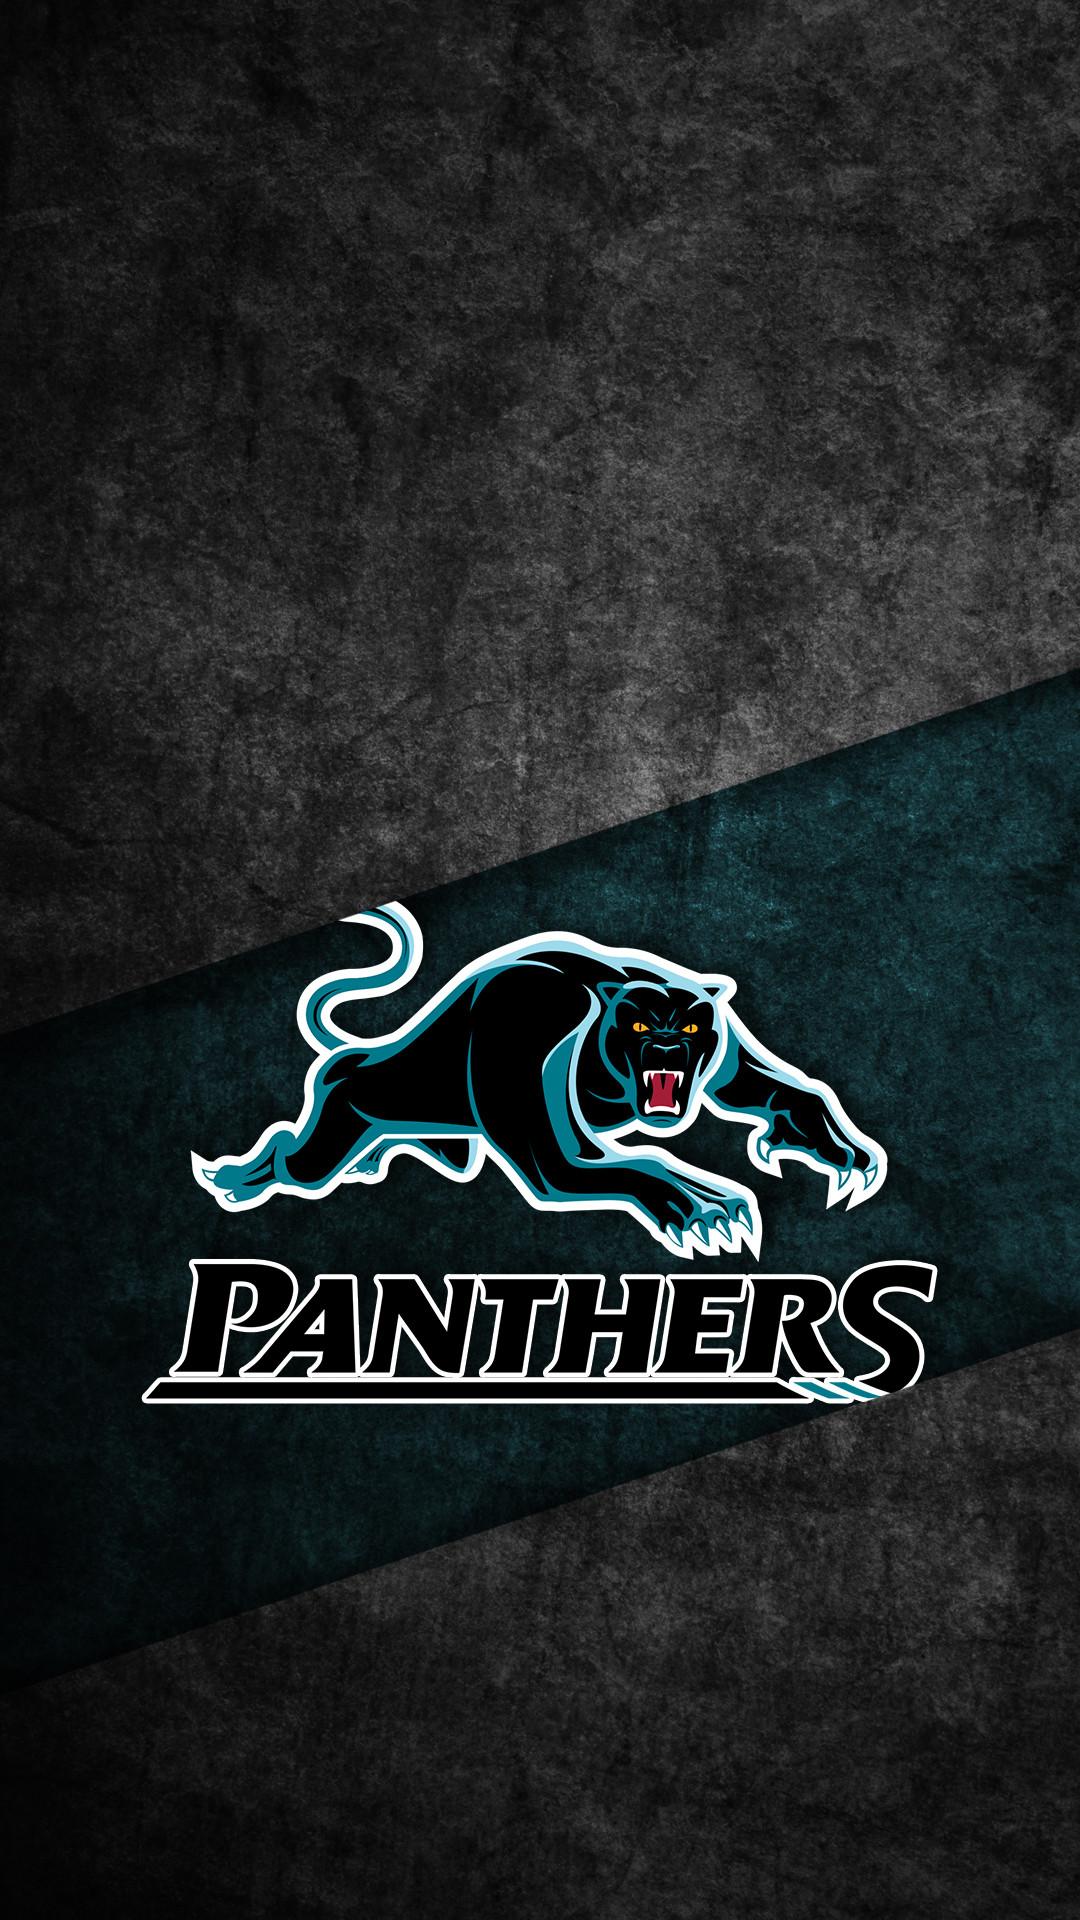 Panthers NRL Wallpapers  Wallpaper Cave